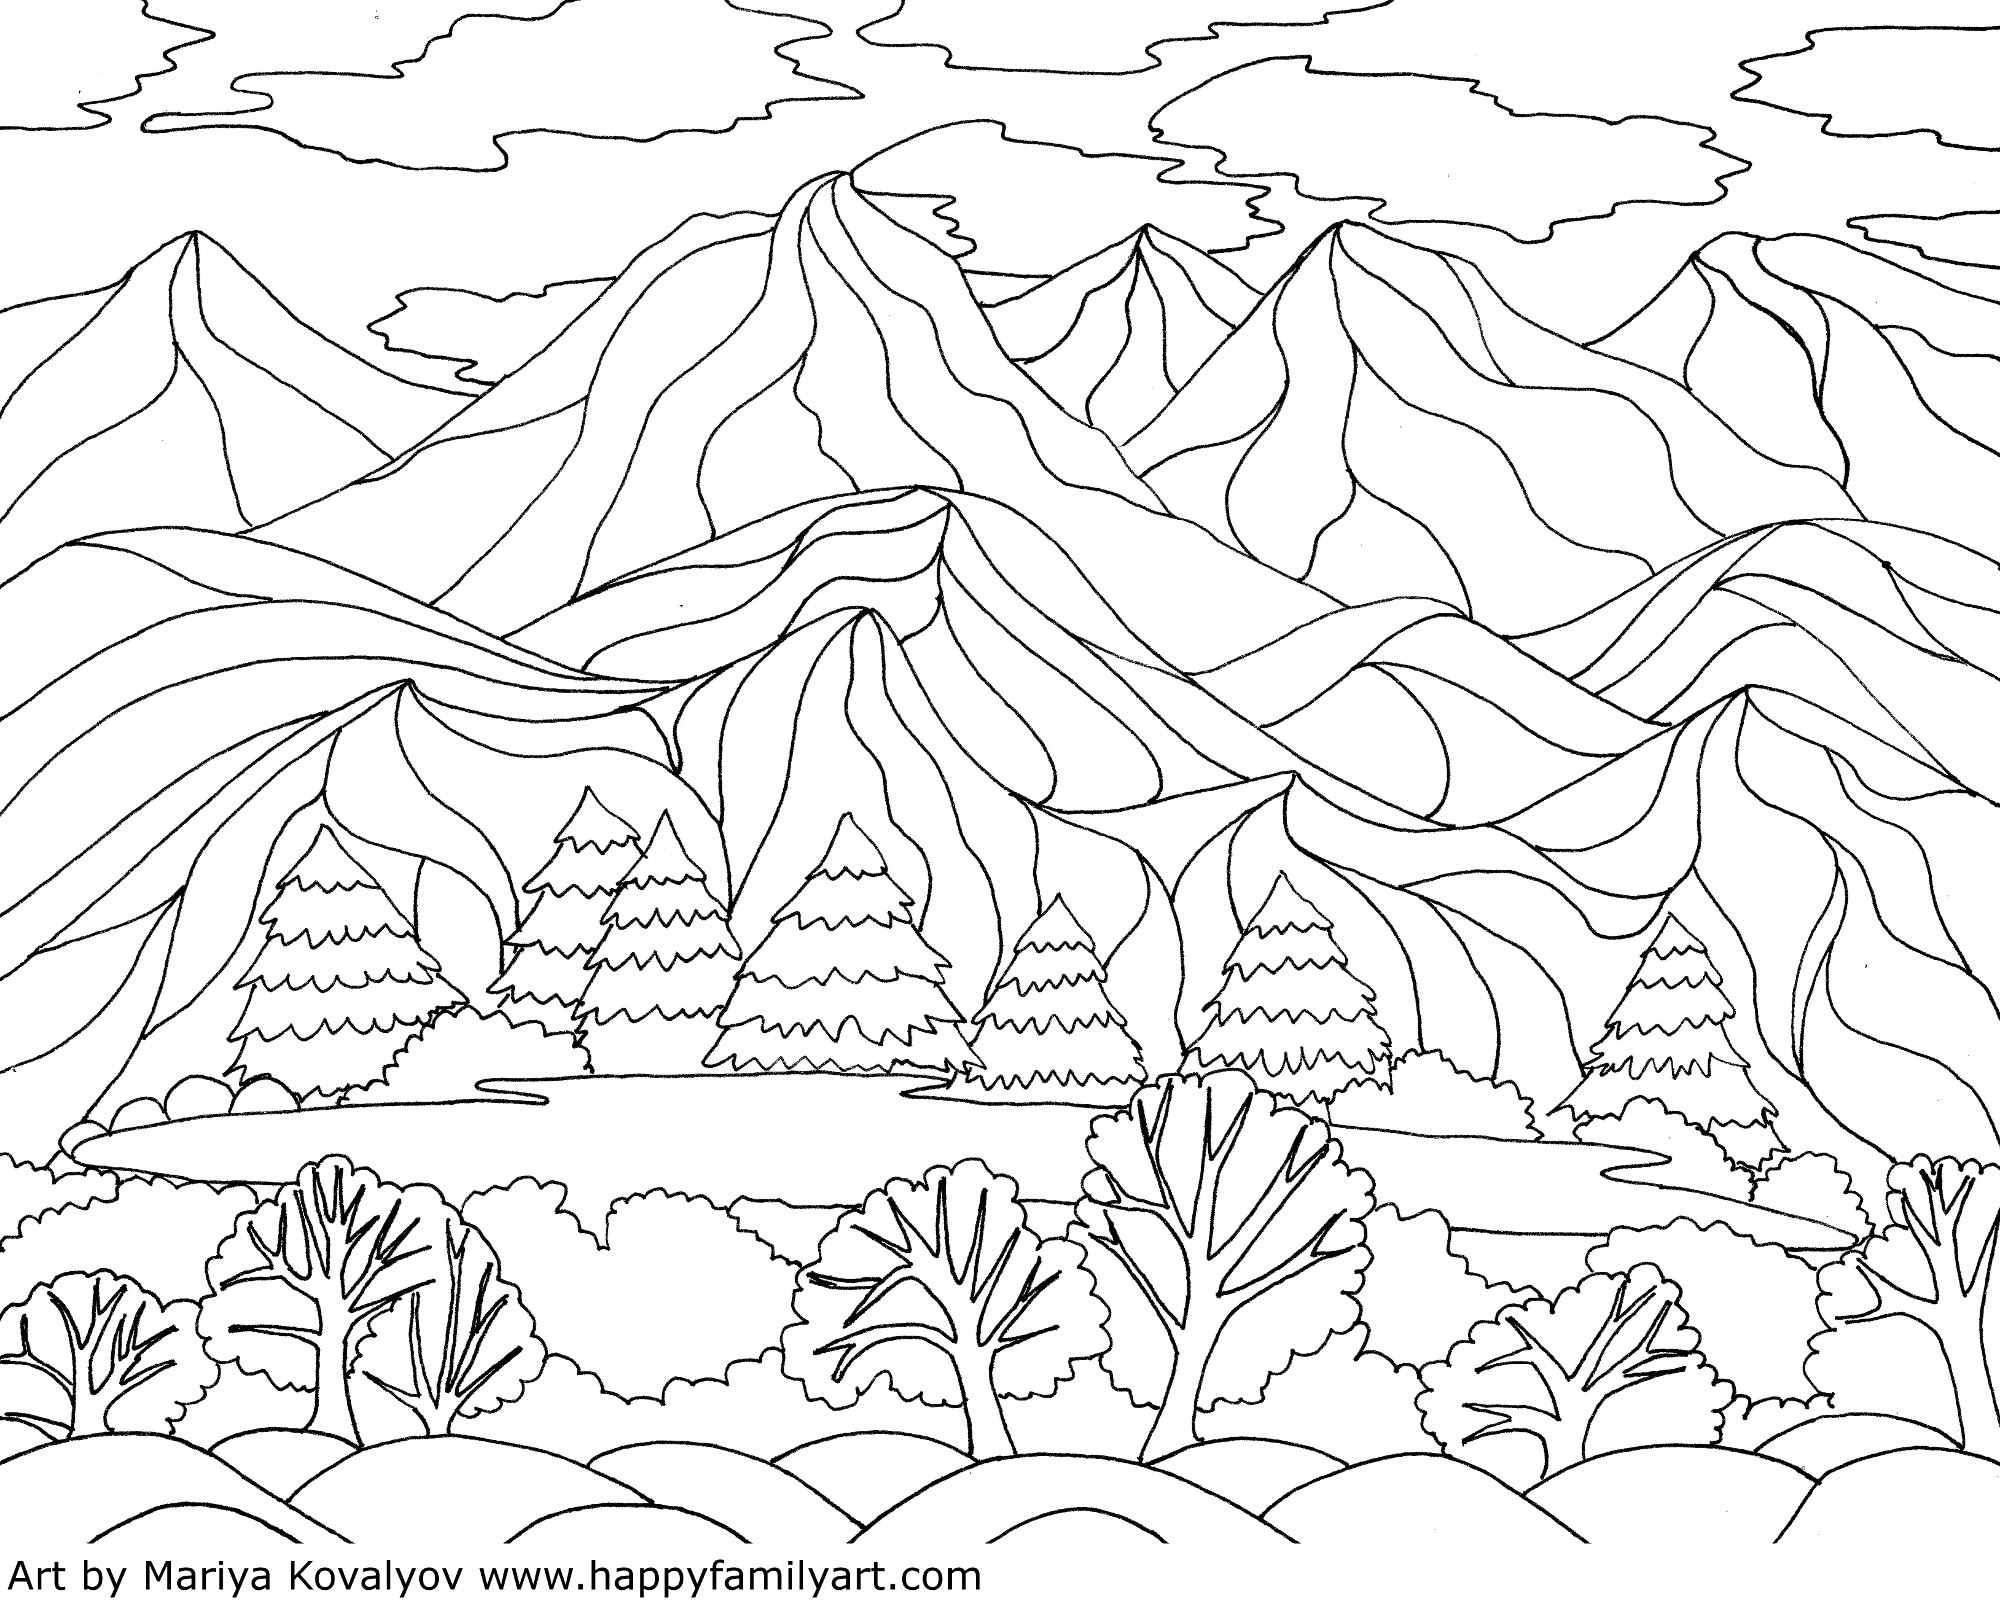 100+] House Colouring Pictures | Wallpapers.com